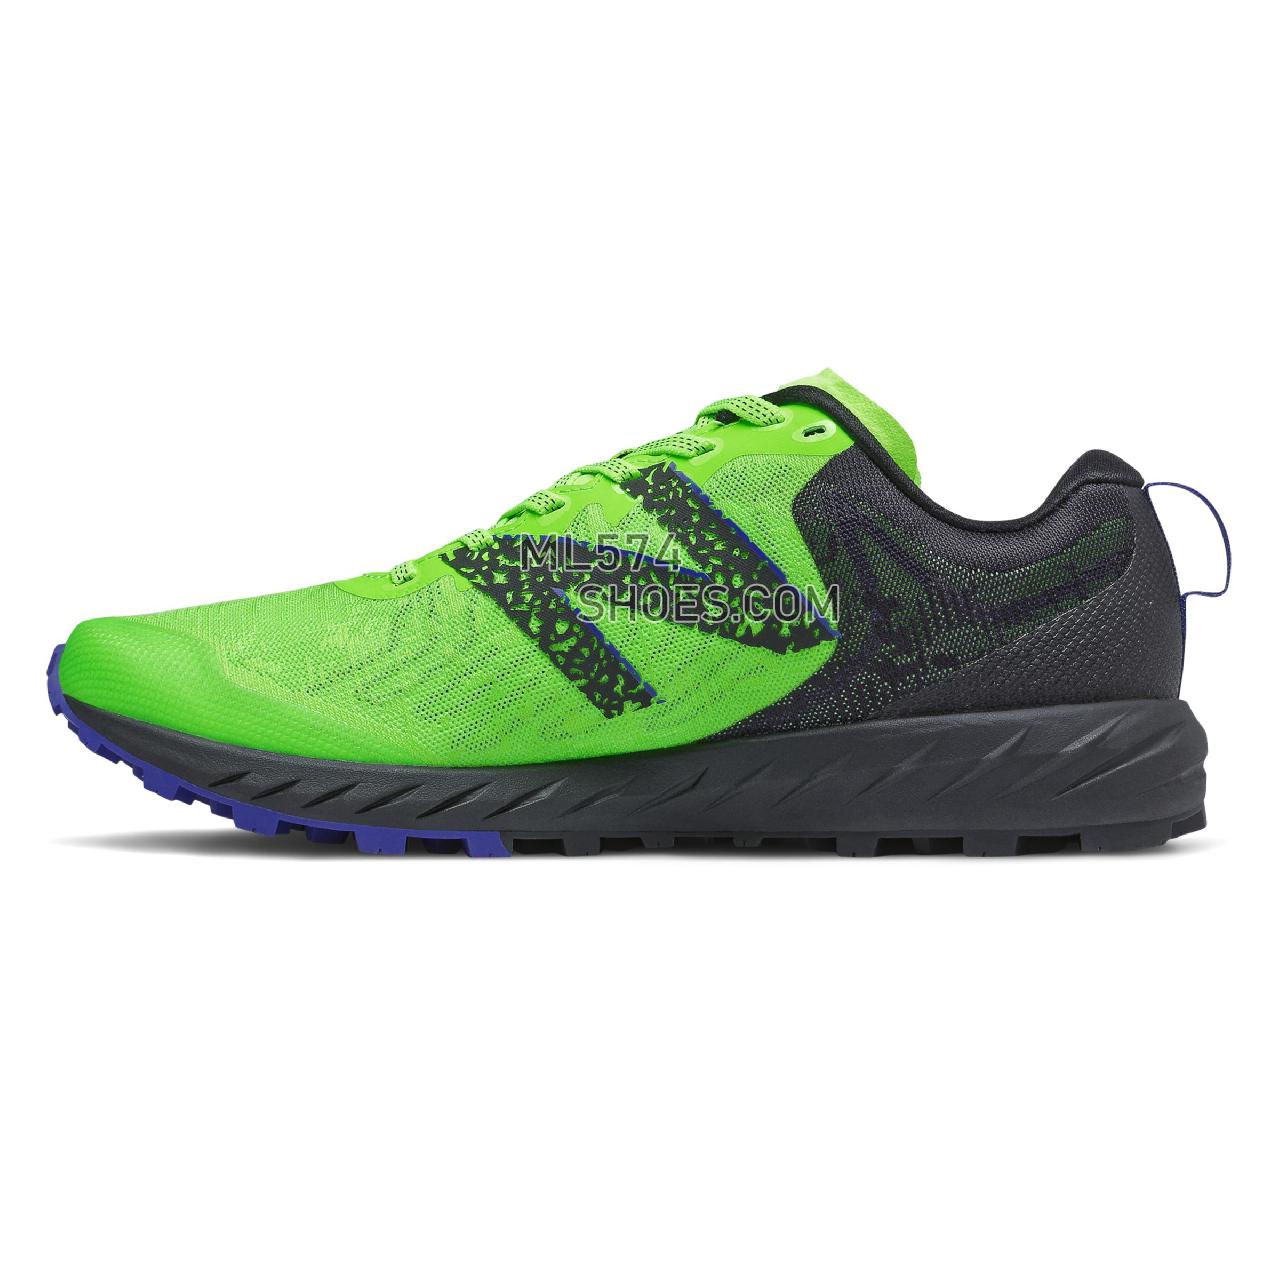 New Balance Summit Unknown v2 - Men's Trail Running - Energy Lime with Black - MTUNKNY2